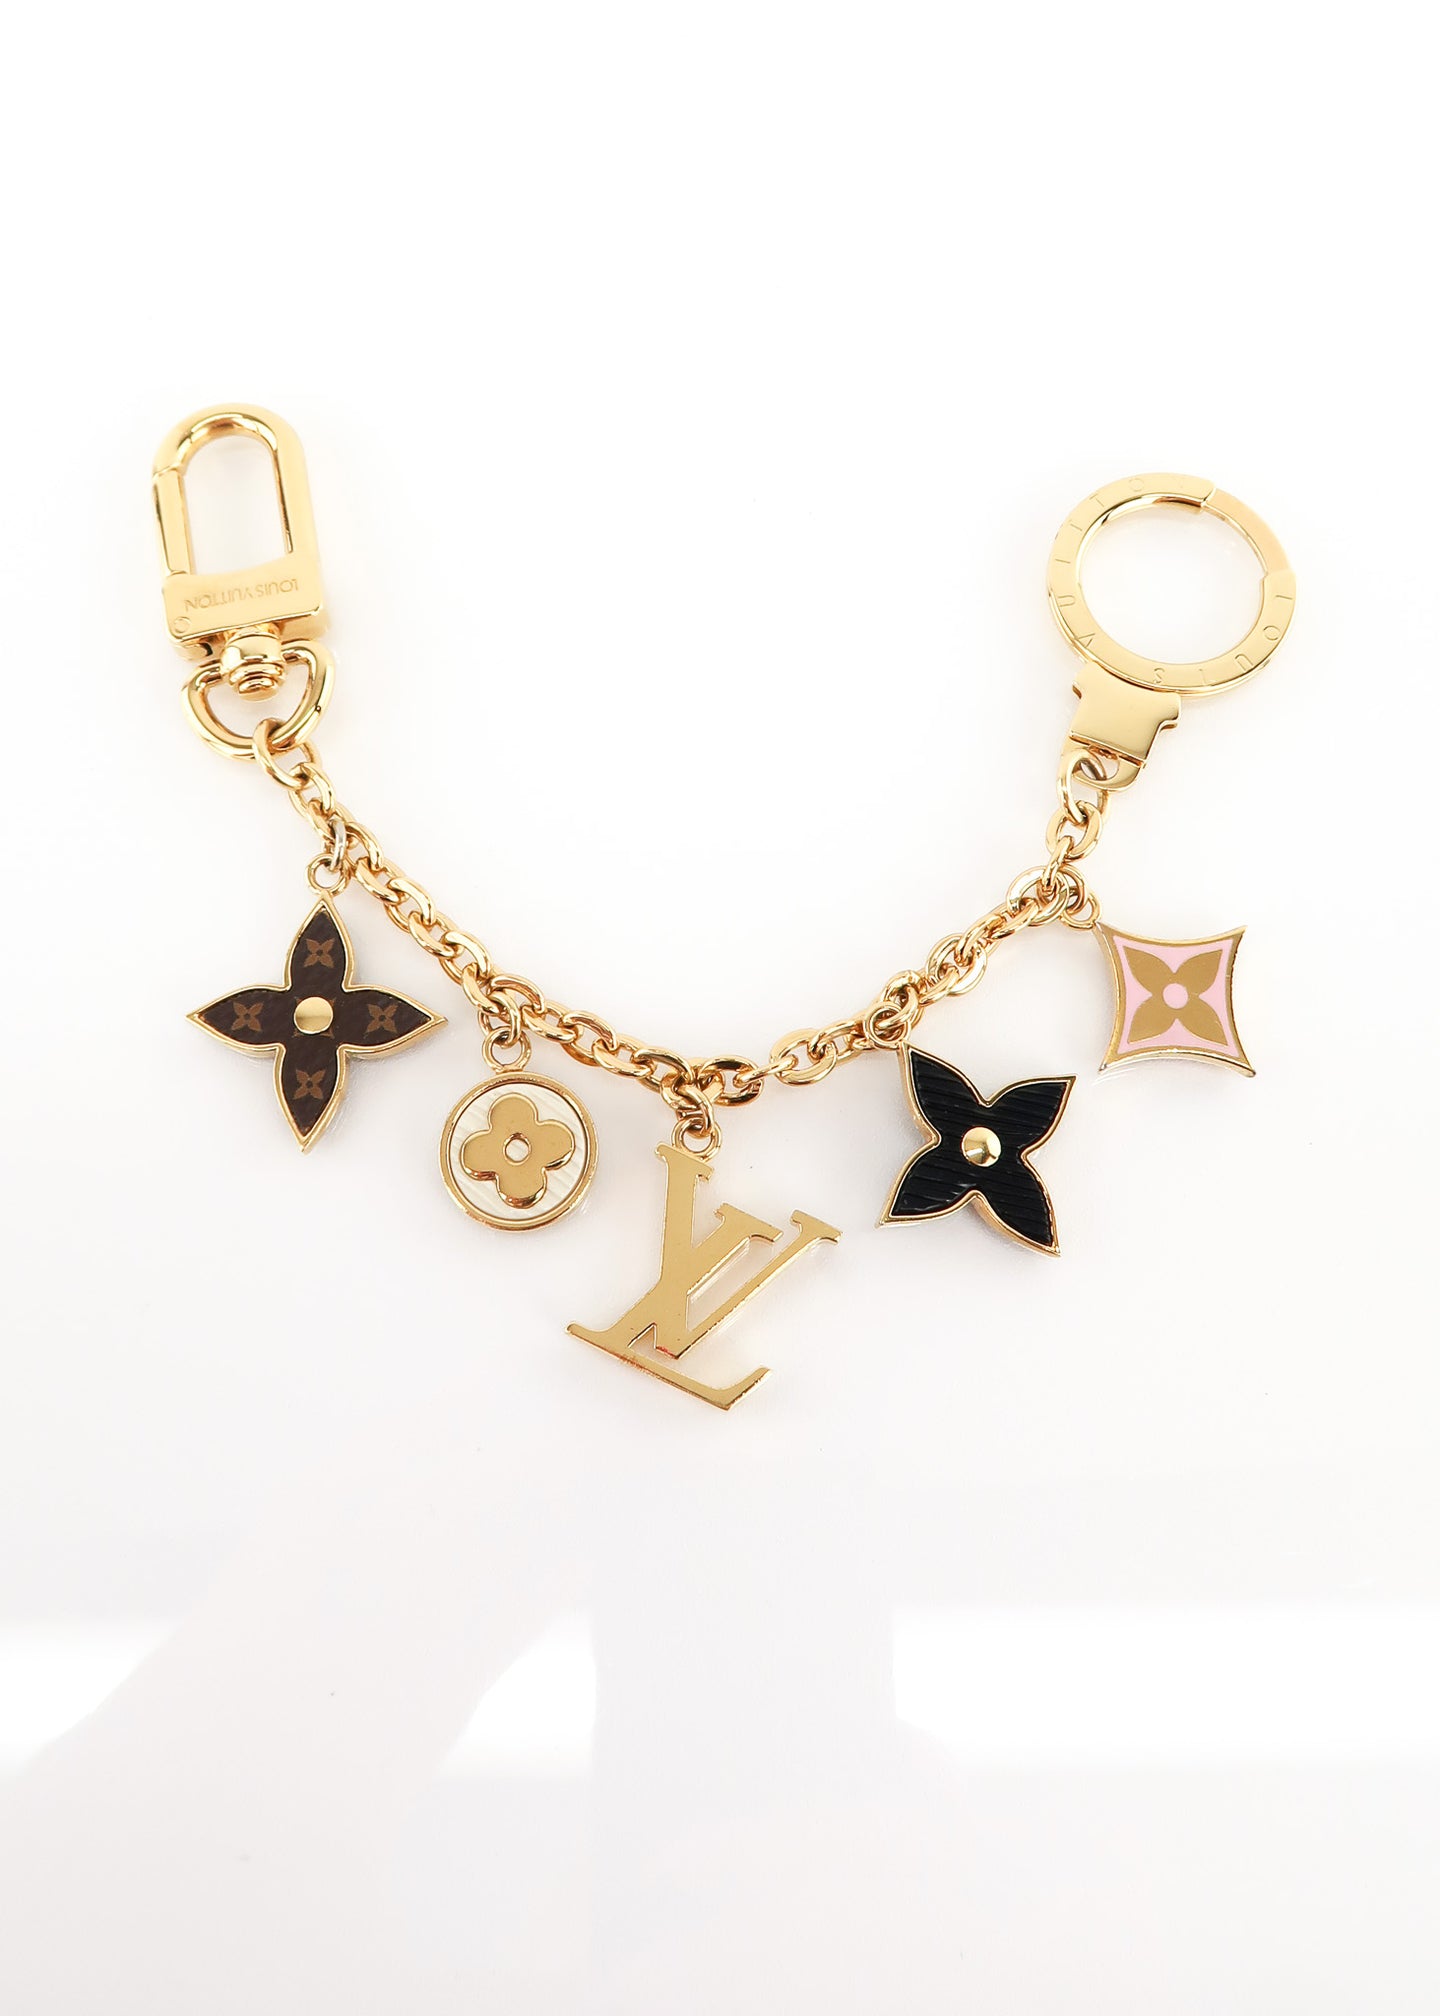 Louis Vuitton Inspired Bag Charms